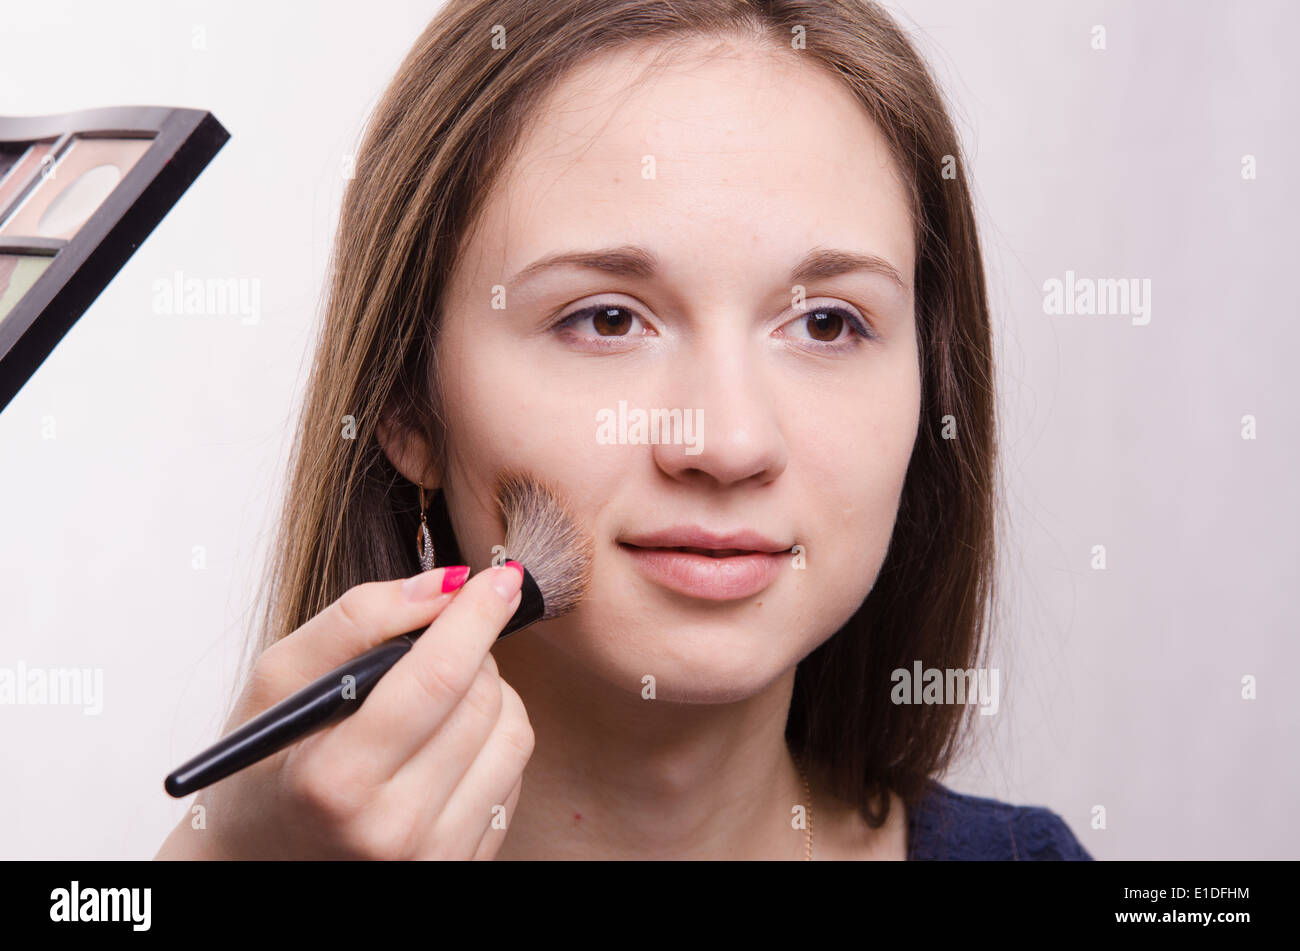 Makeup artist applies powder on the face of a beautiful young girl in ...